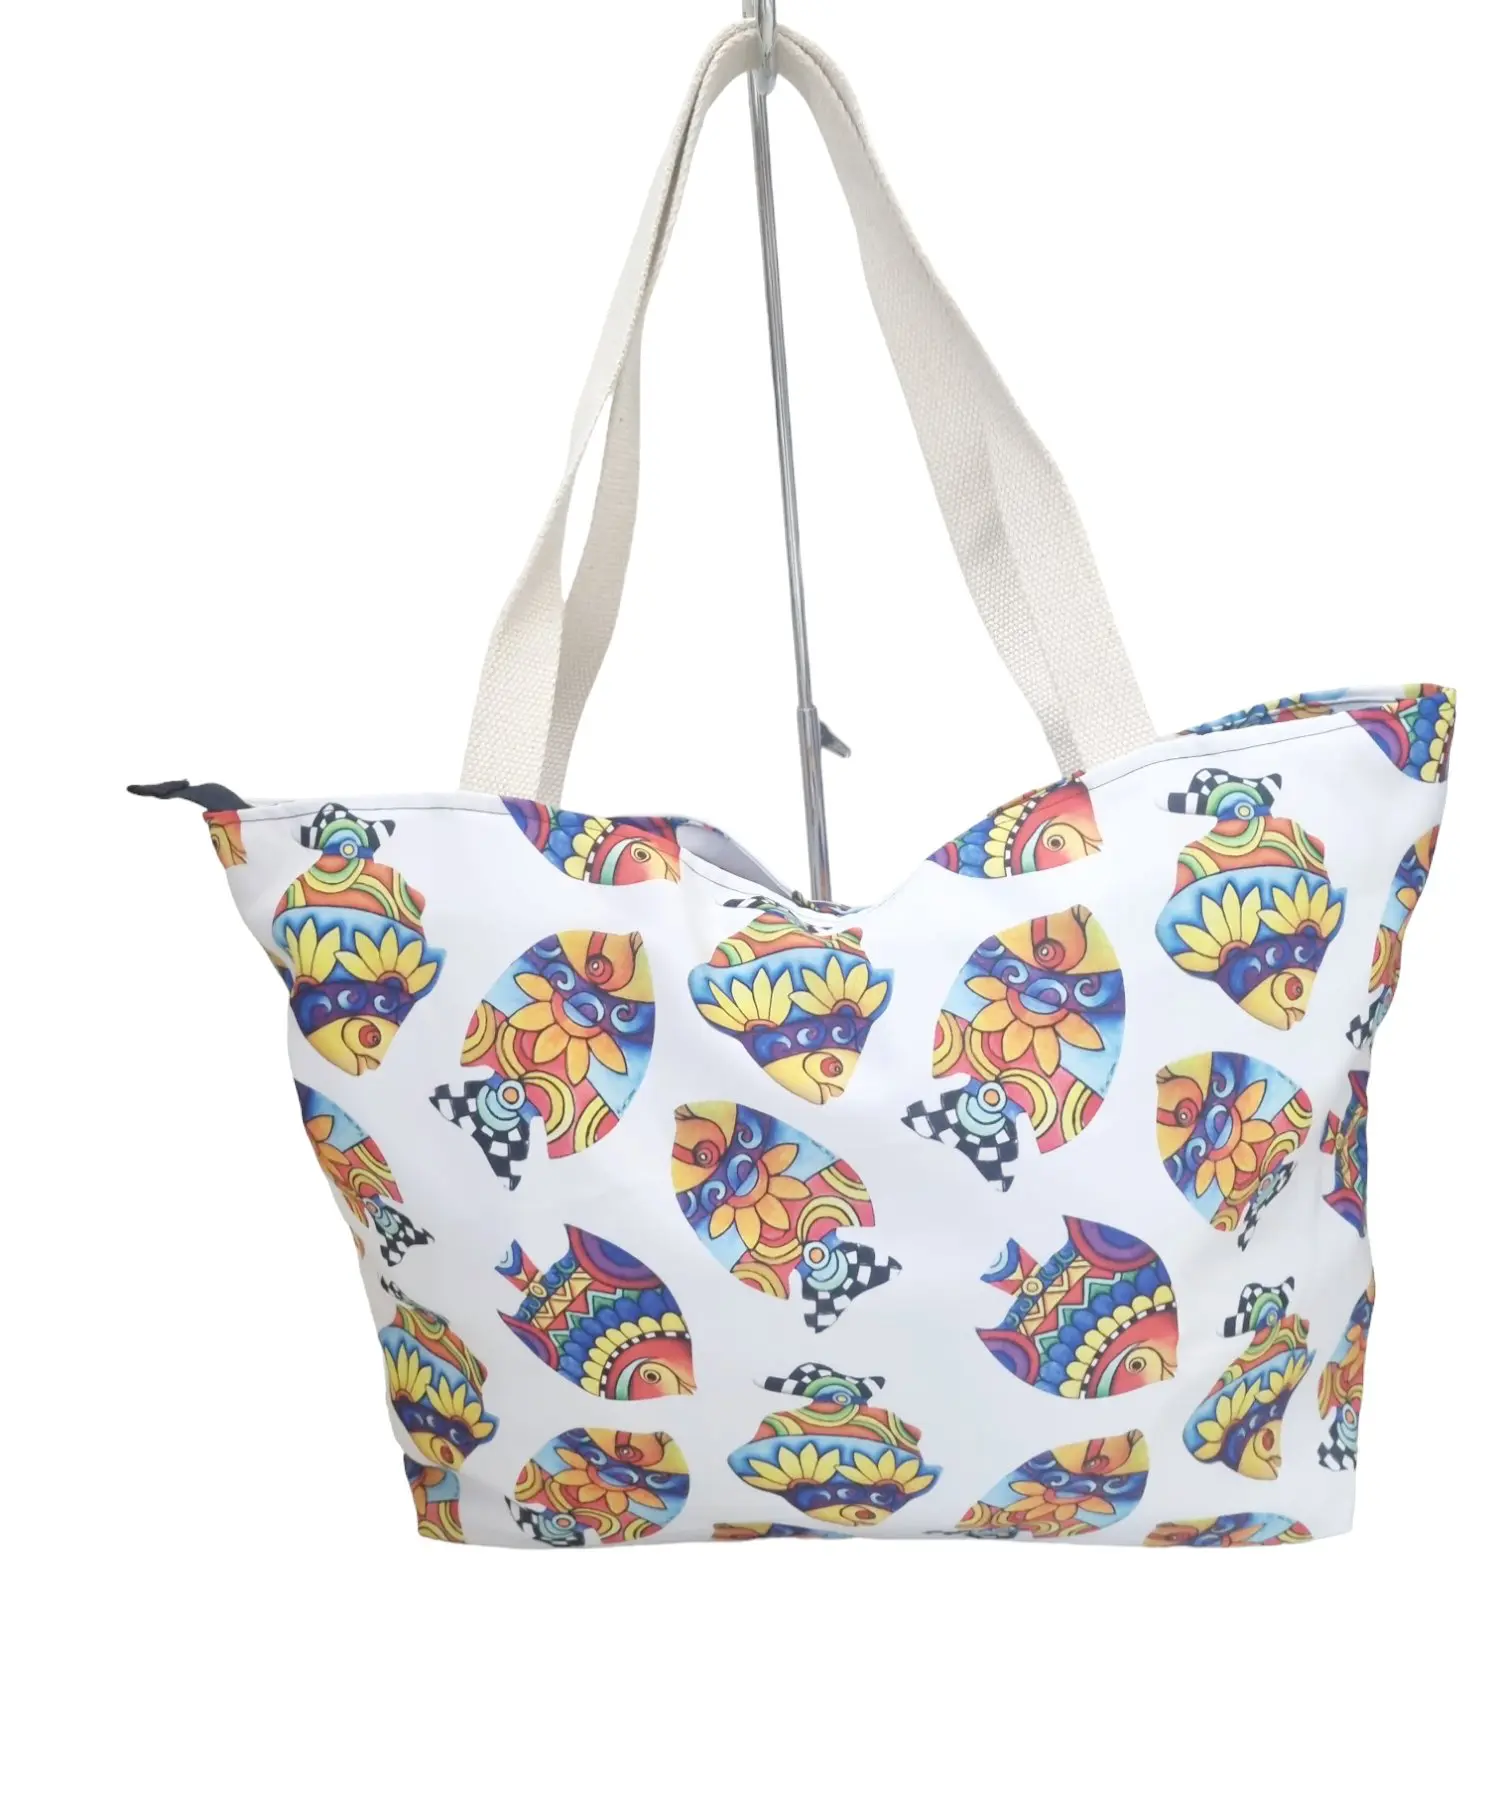 Large Beach Shopper Bag in Polyester with Large Fish Pattern – Handmade in Italy